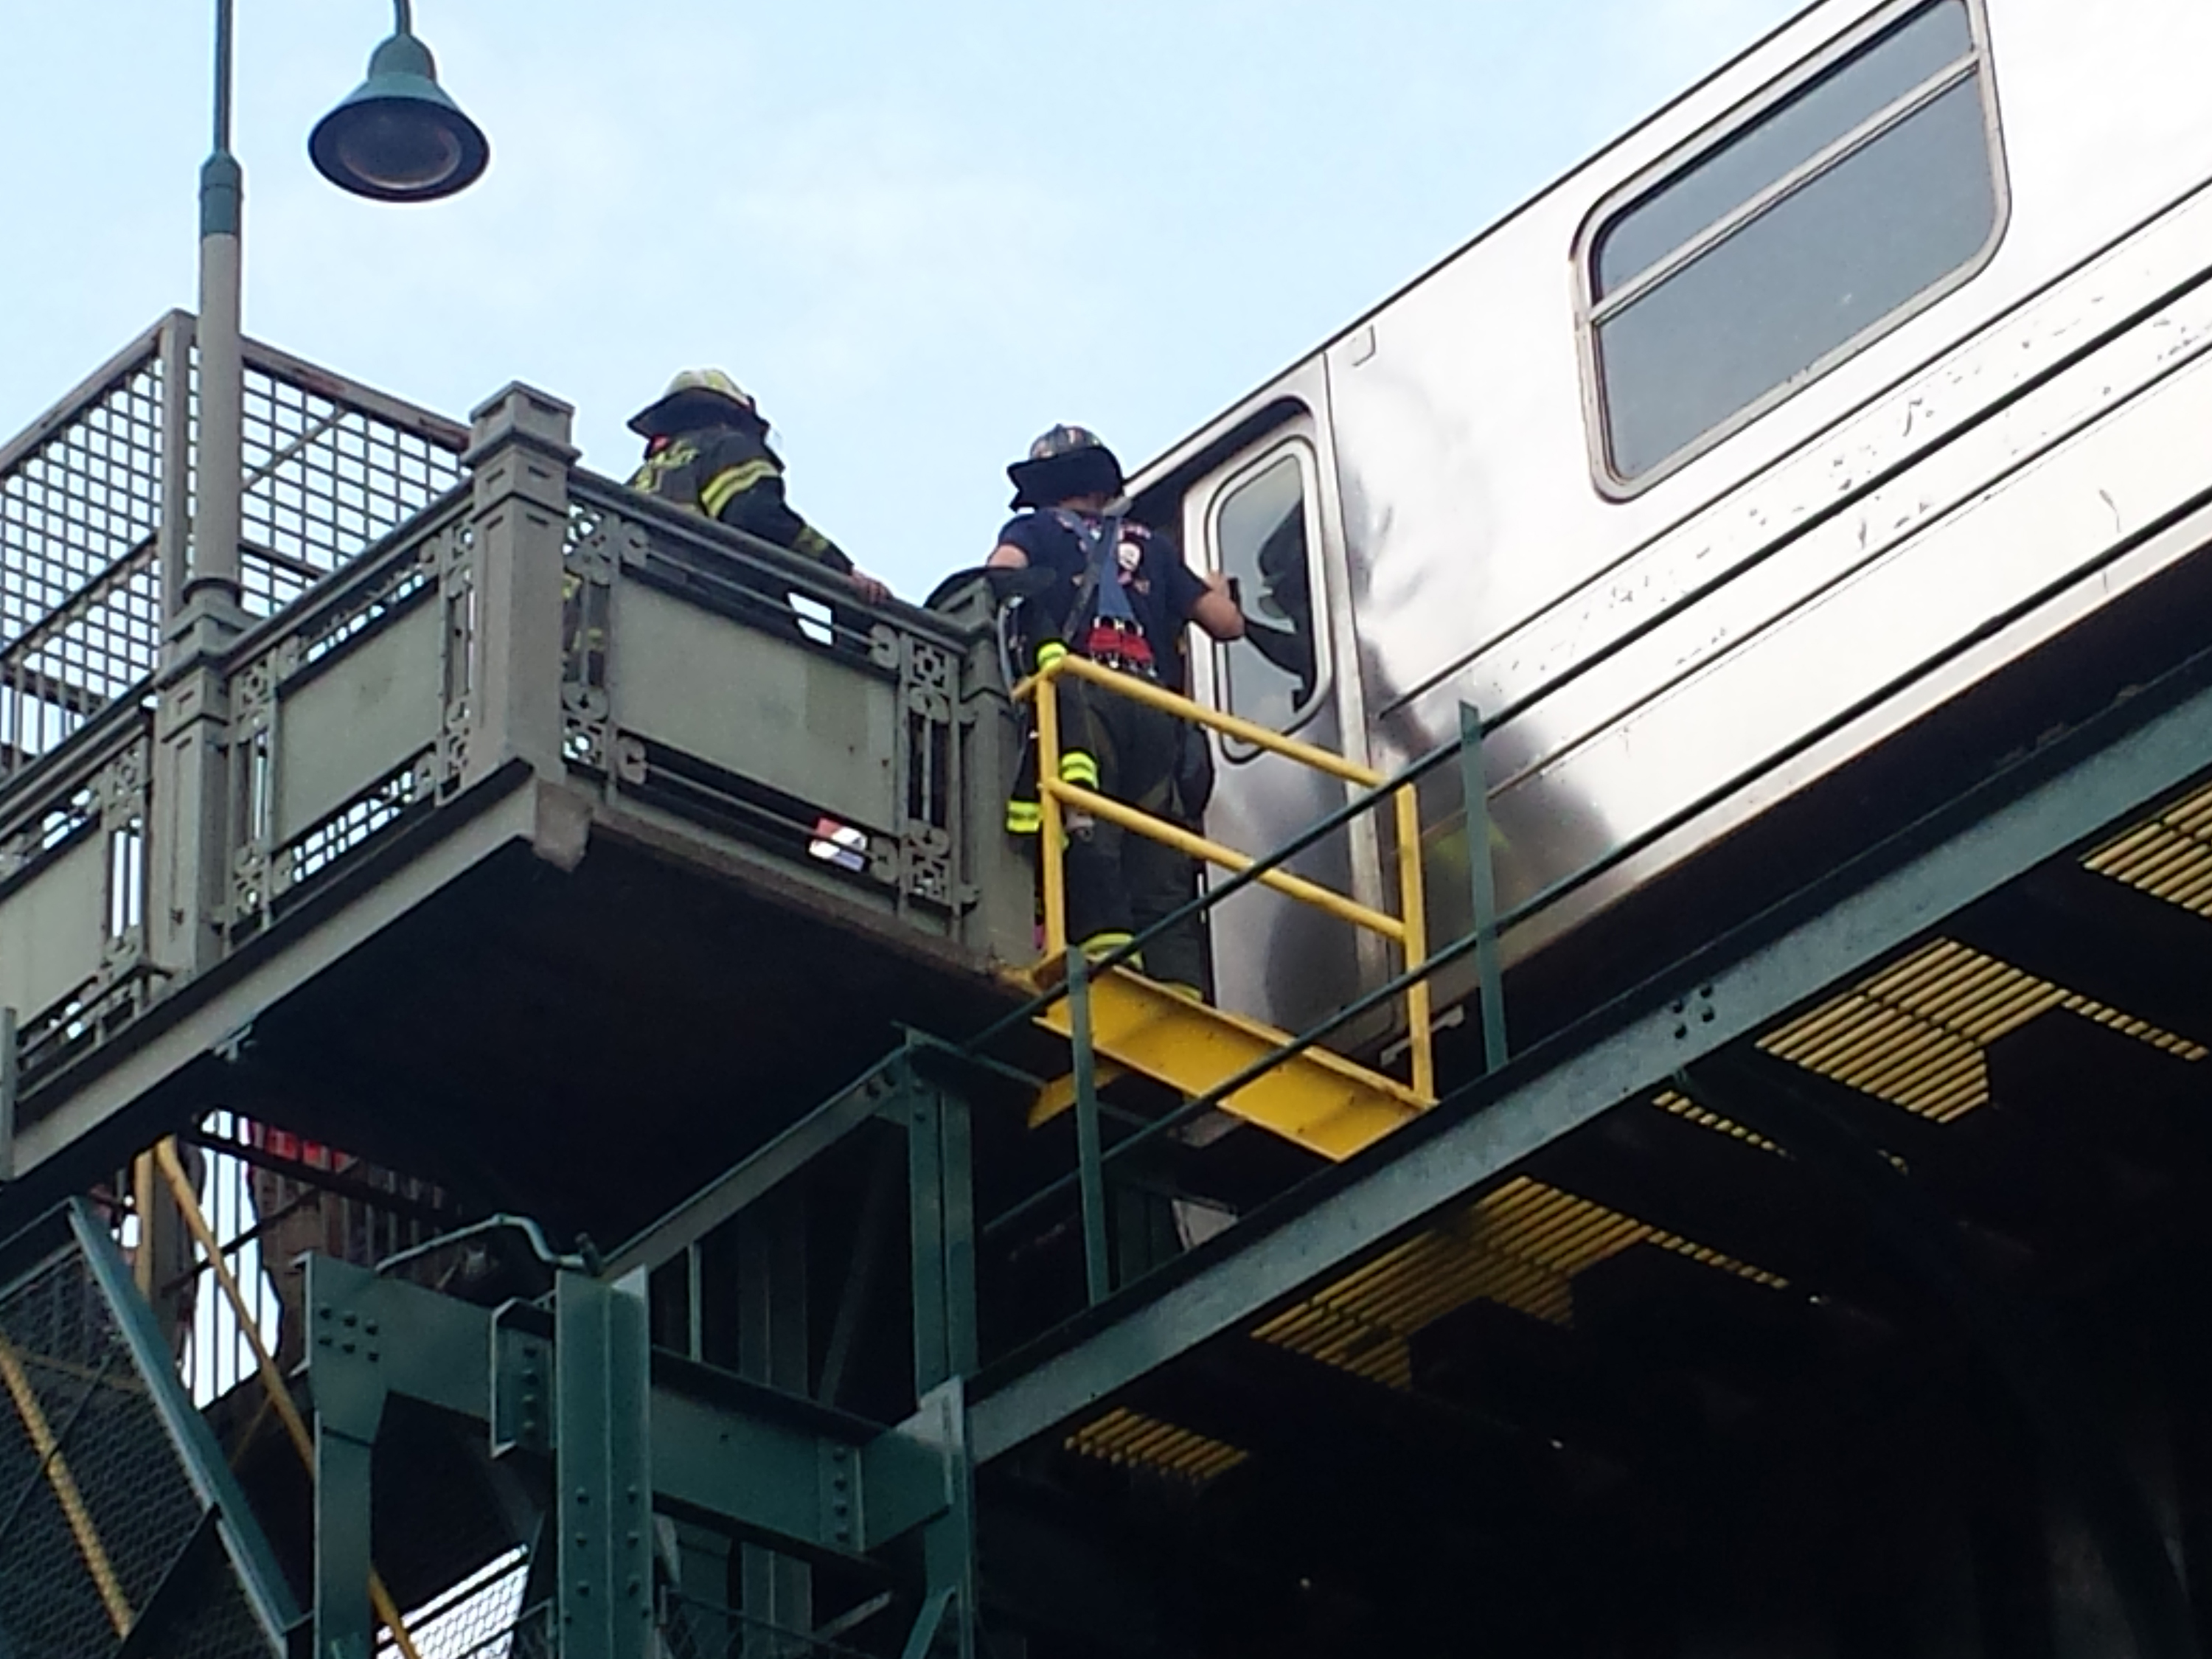 A 1 line train derailed in New York, New York, on May 29, 2013. (Steve Silva)